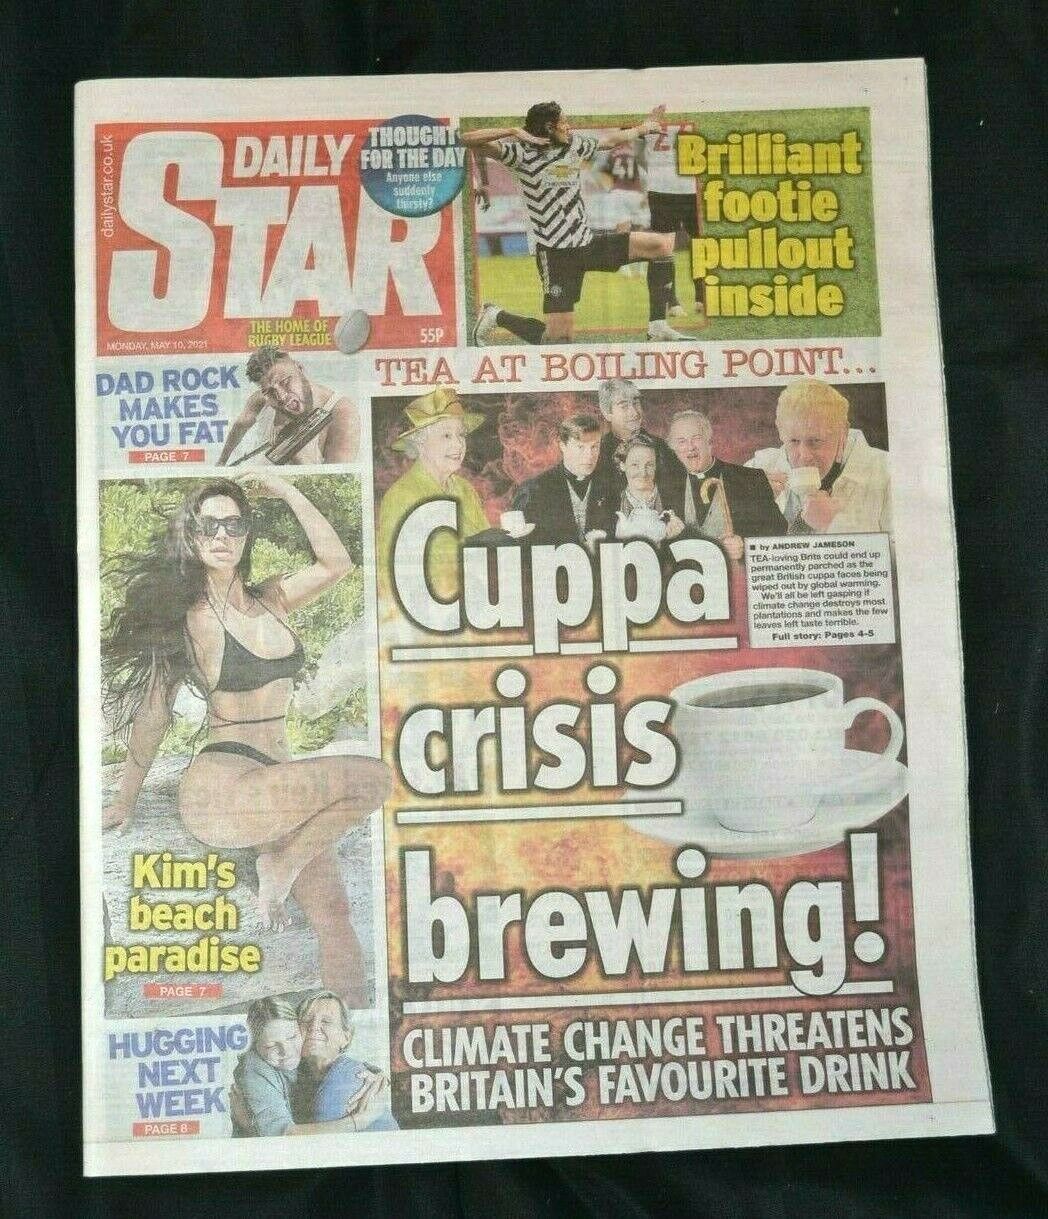 Daily Star Newspaper 10/05/21 May 10th 2021 Tea Leaves Climate Change Threat